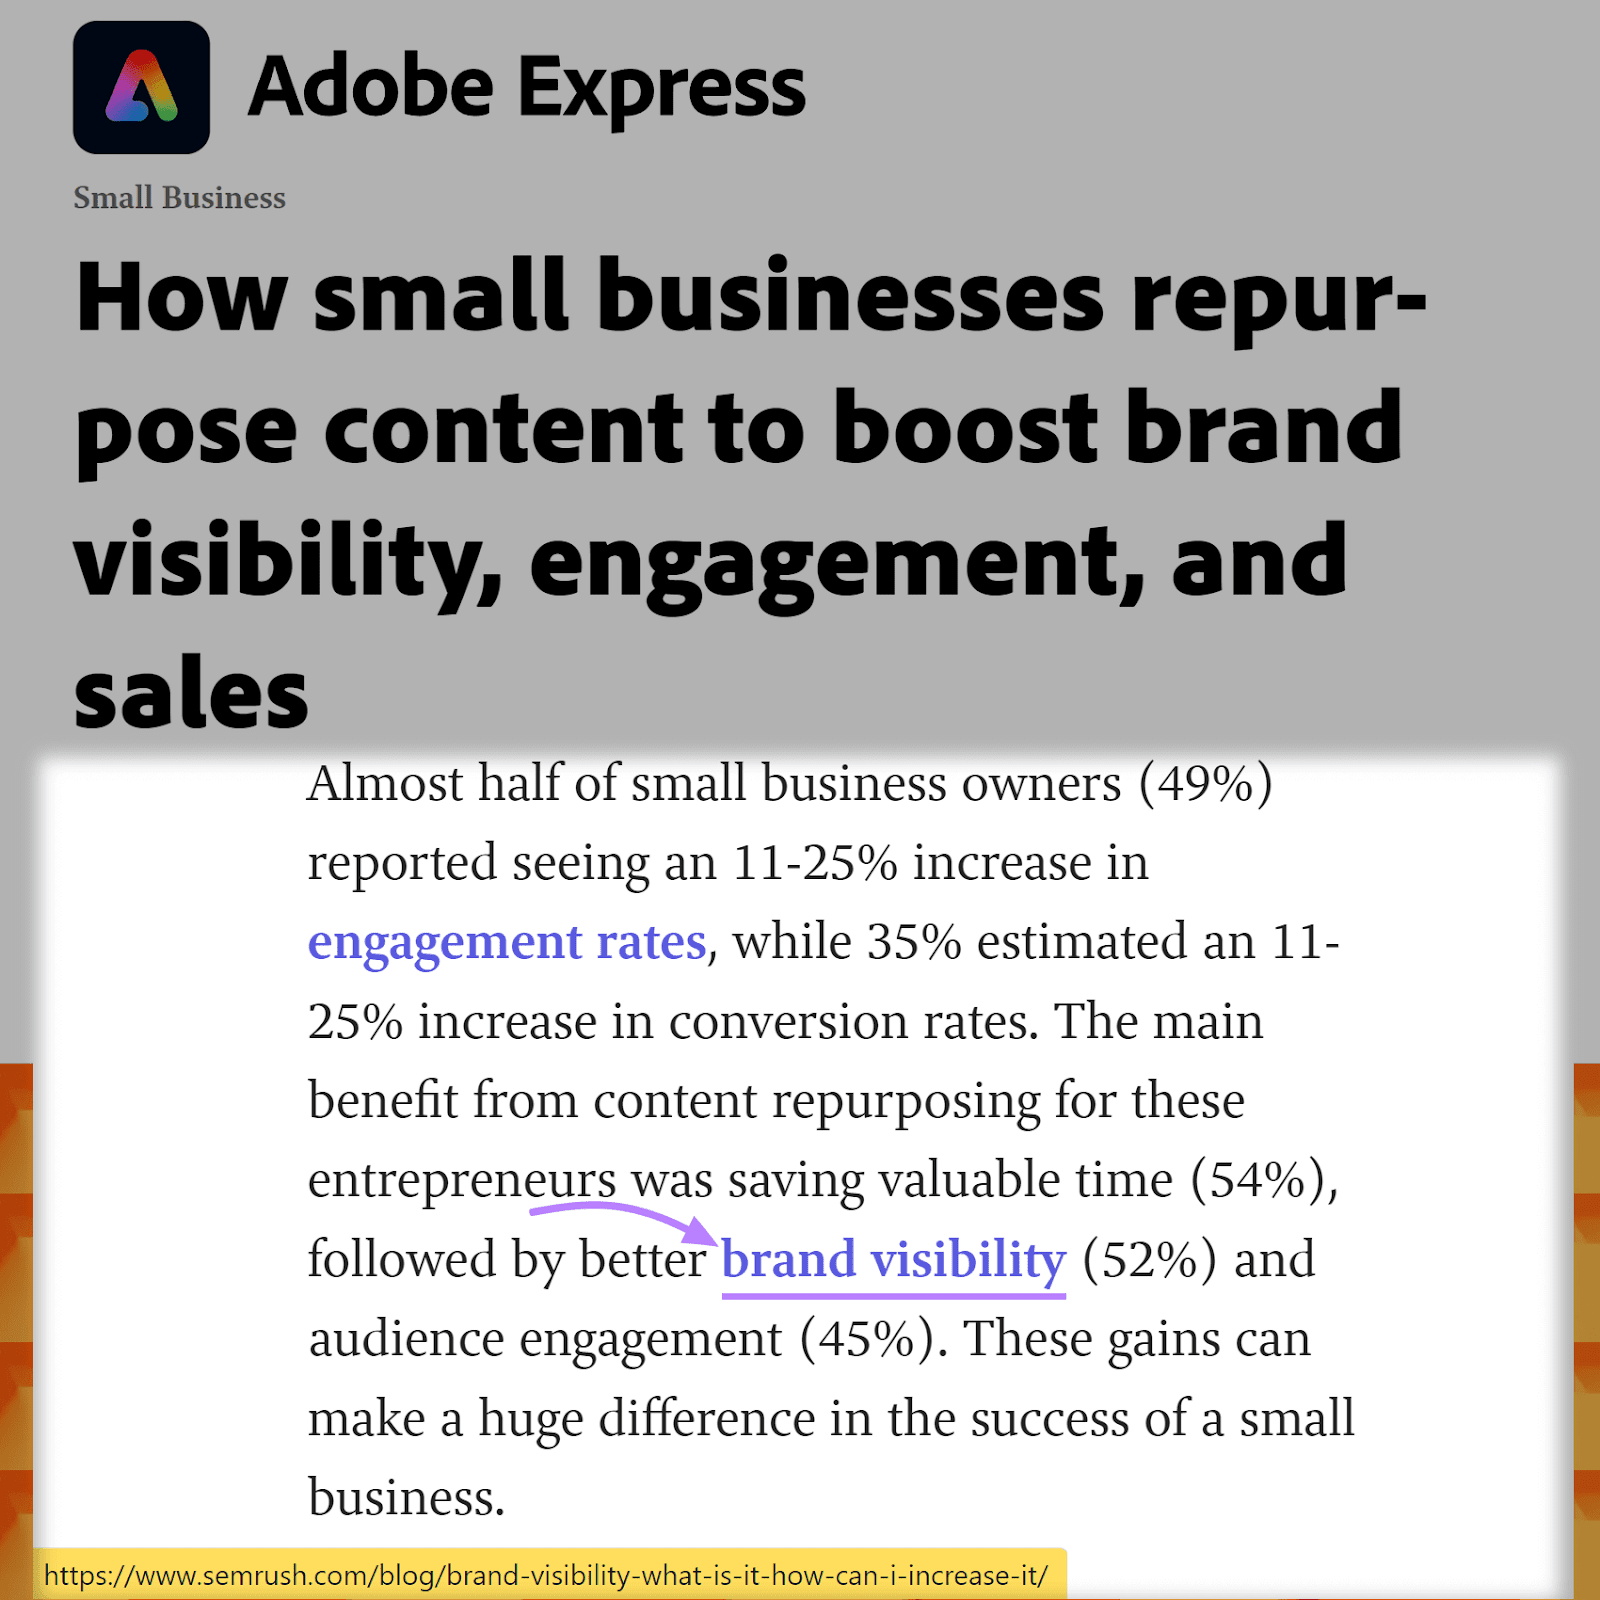 A blog from Adobe Express with the keyword "brand visibility," linking to a Semrush blog highlighted in purple.